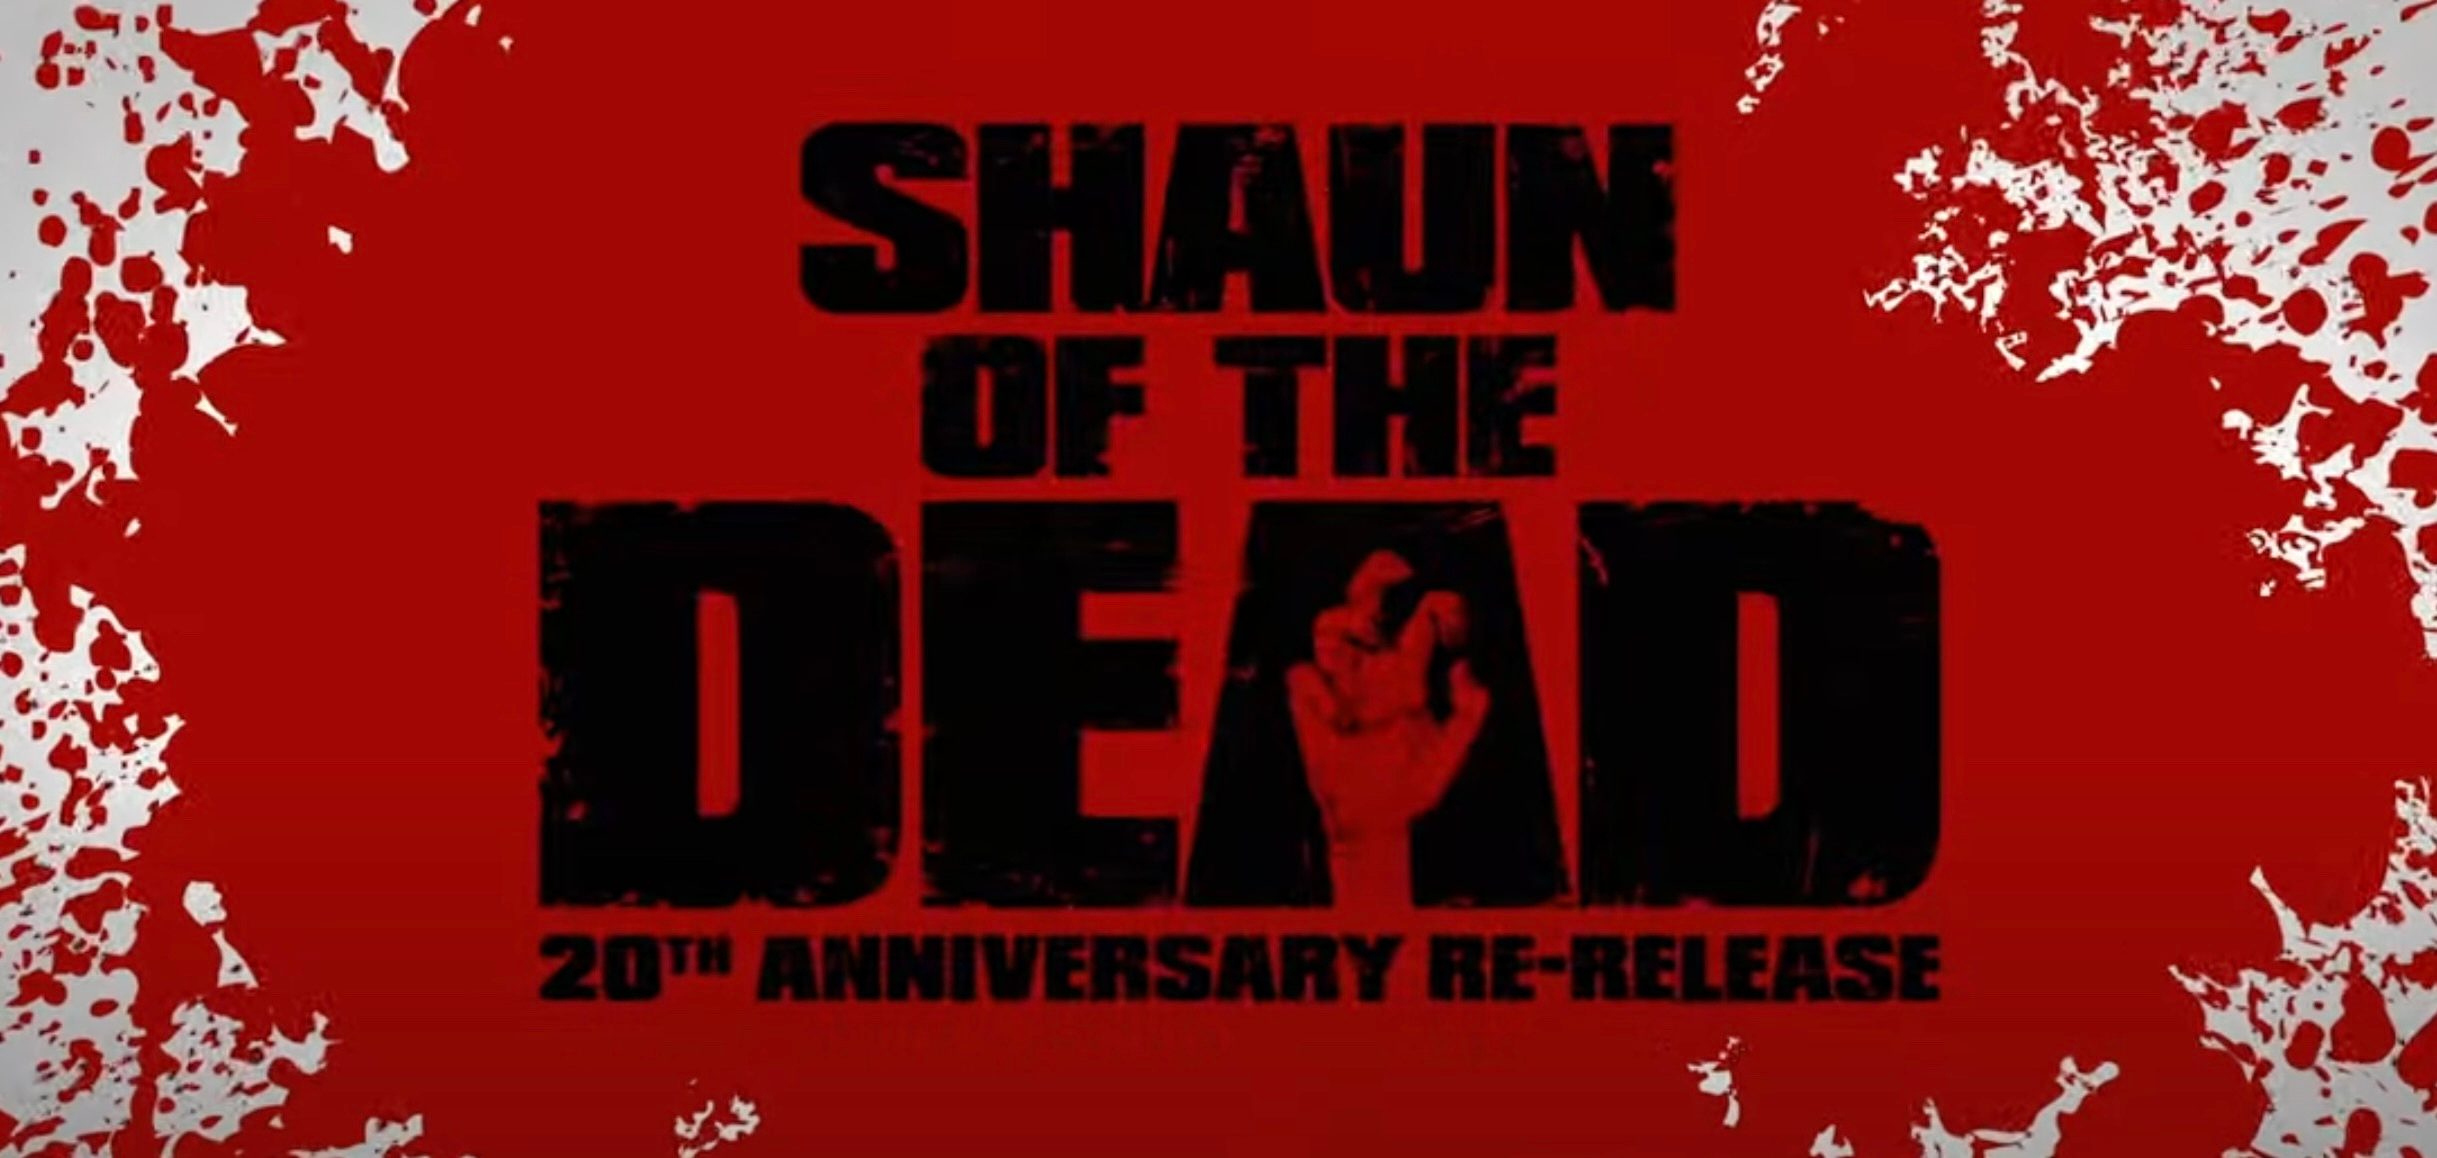 Edgar Wright’s ‘Shaun Of The Dead’ Sees A Re-Release For The Film’s 20th Anniversary